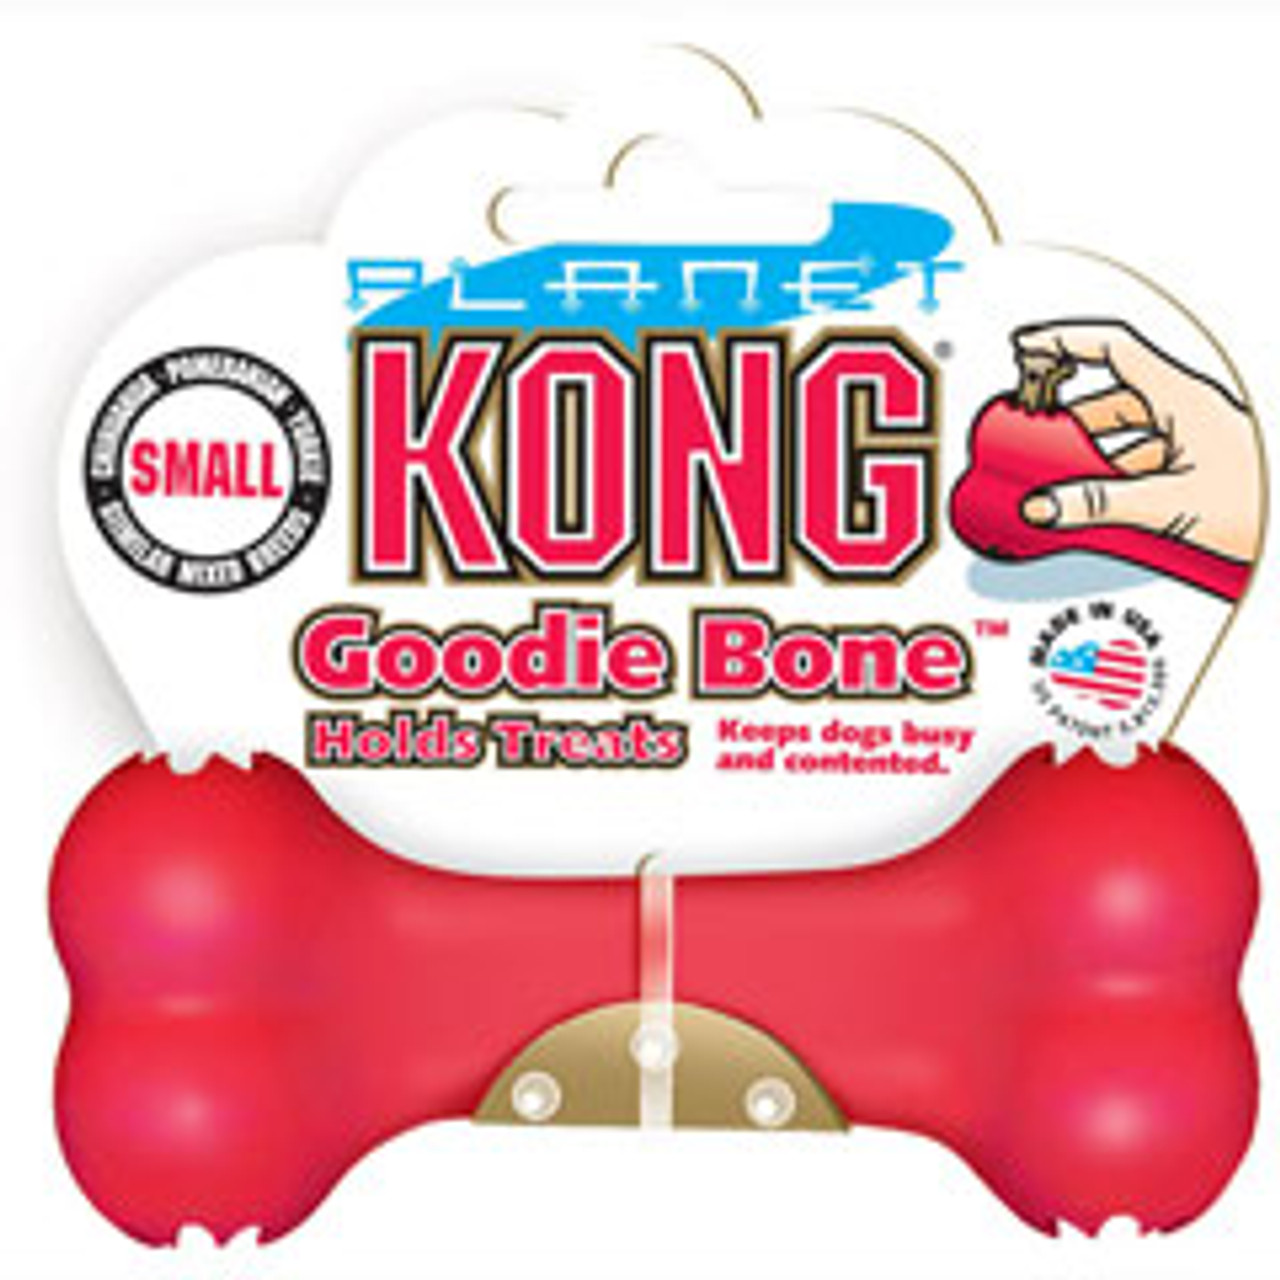 KONG GOODIE BONE TREAT DISPENSER FOR DOGS SMALL - Maxwell's of Chelmsford